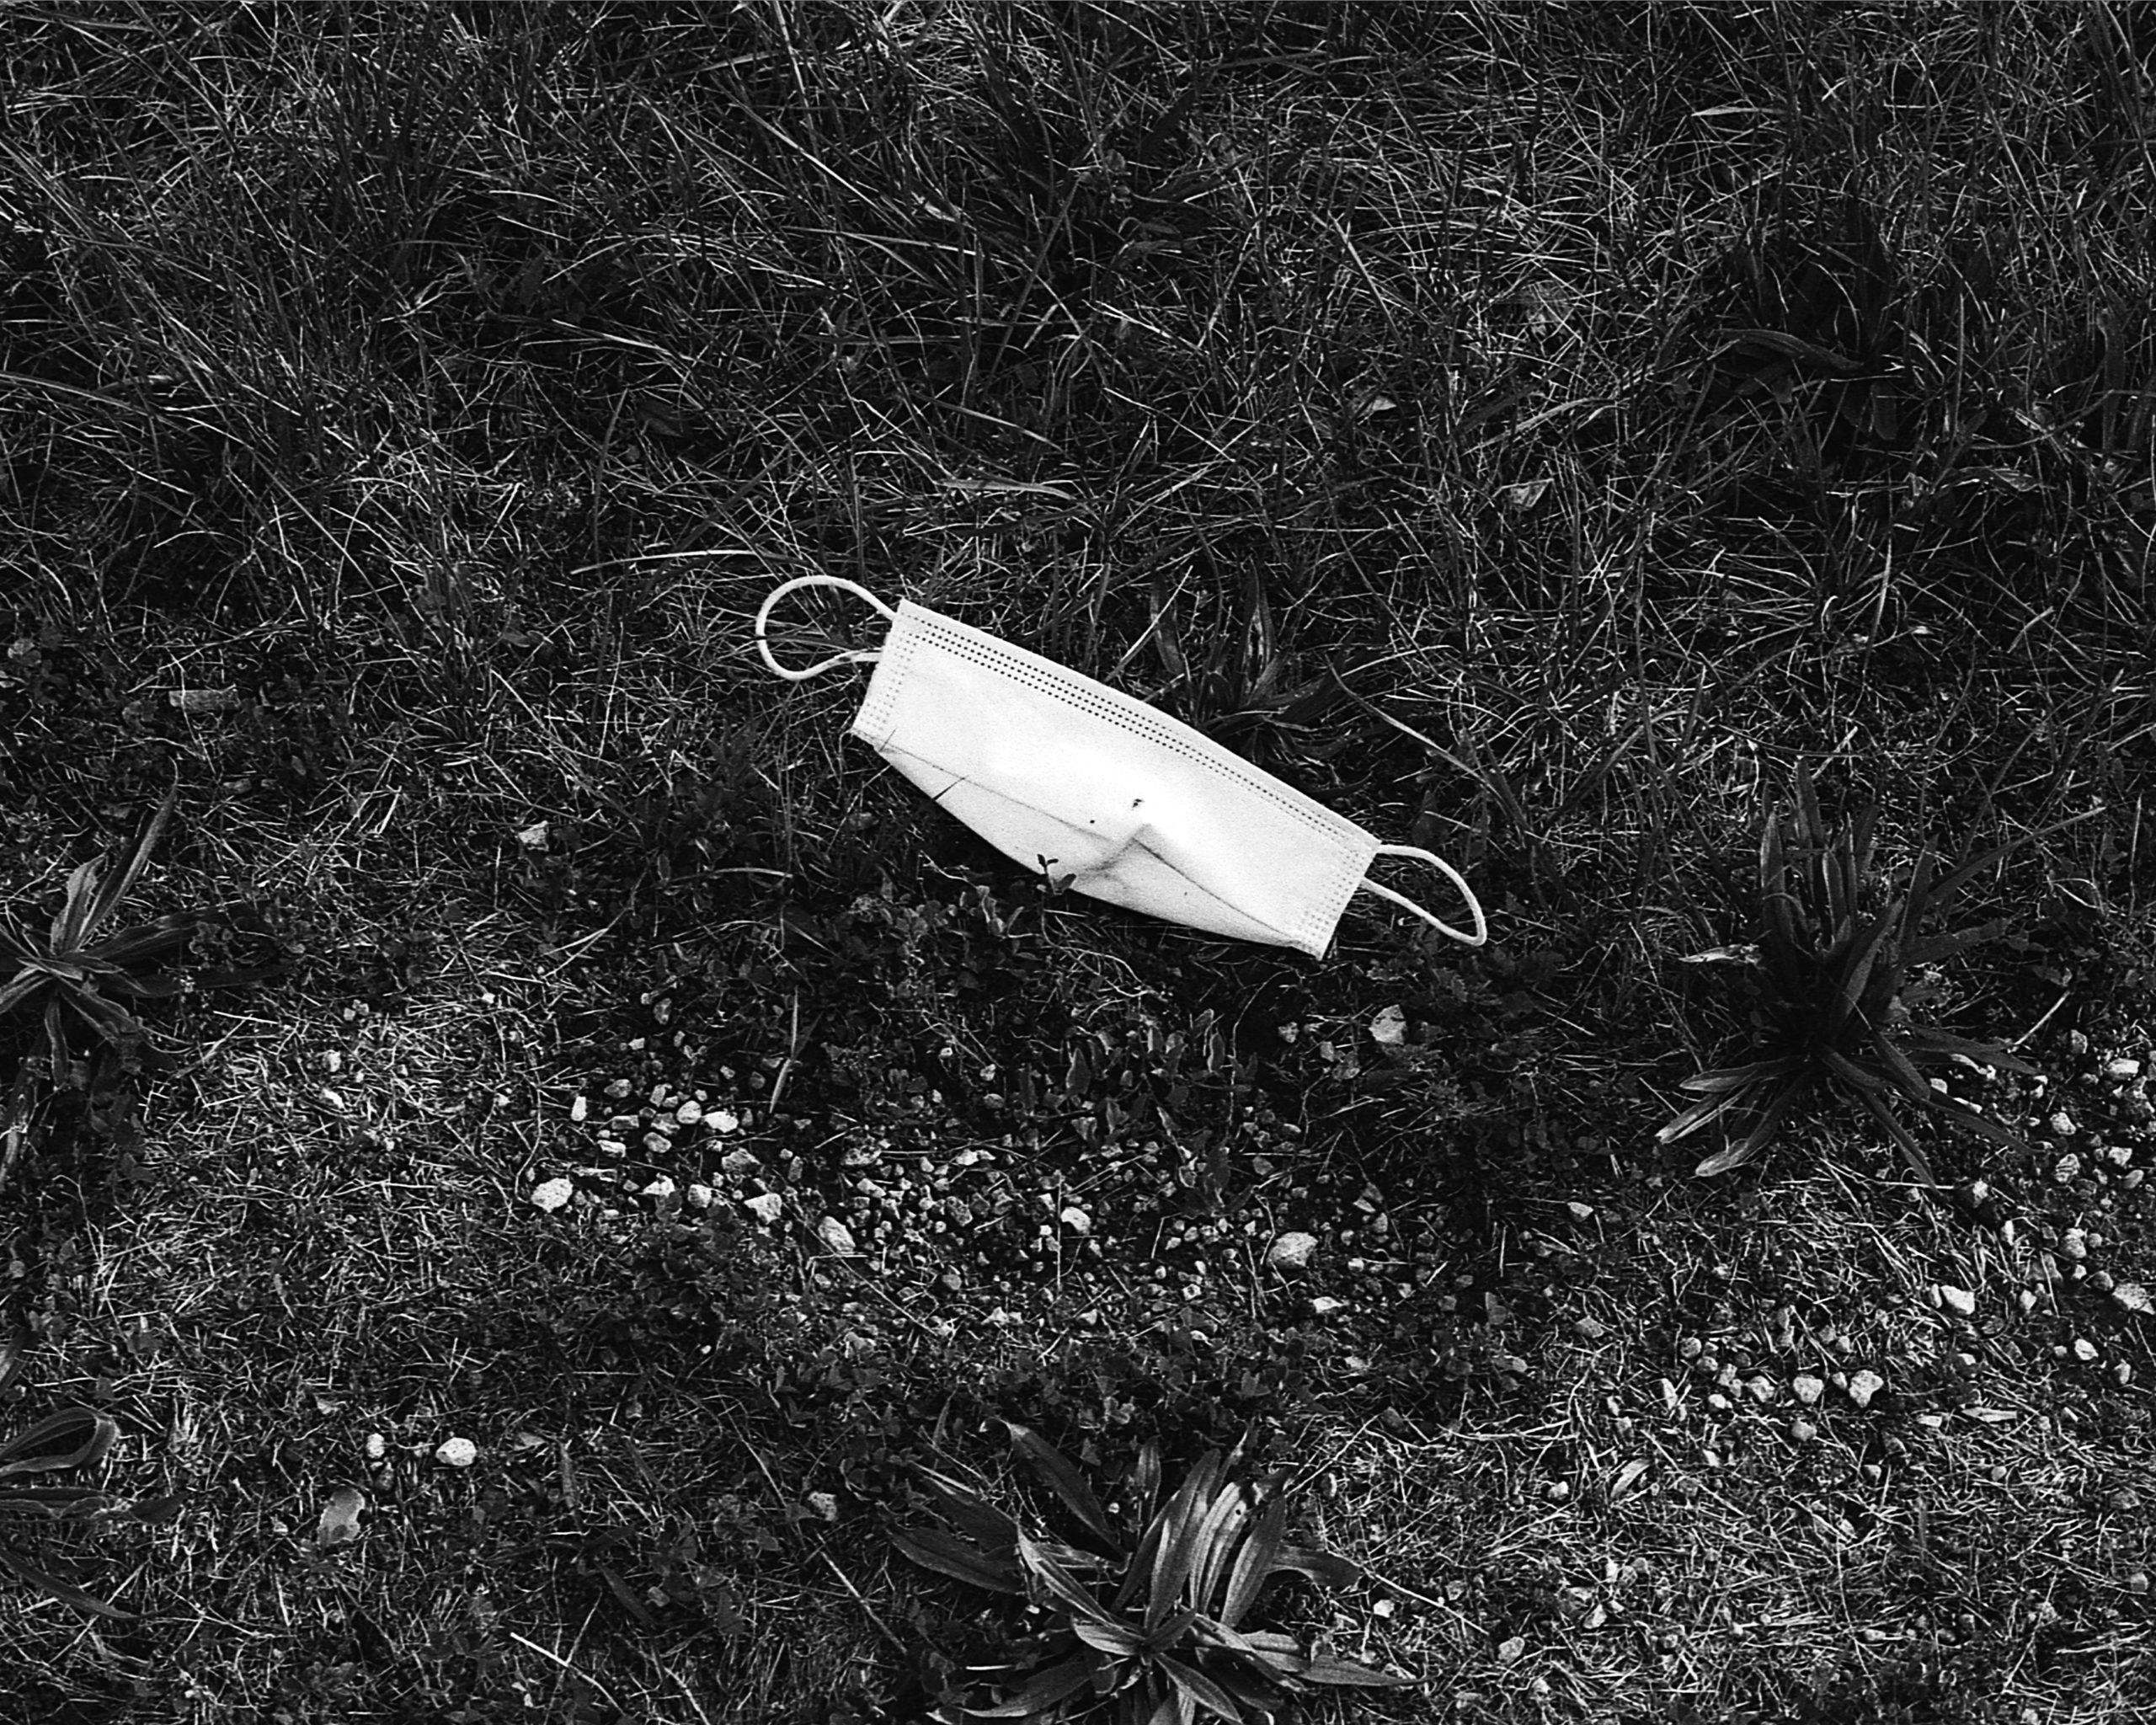 Black and white photo of a surgical mask discarded in the grass